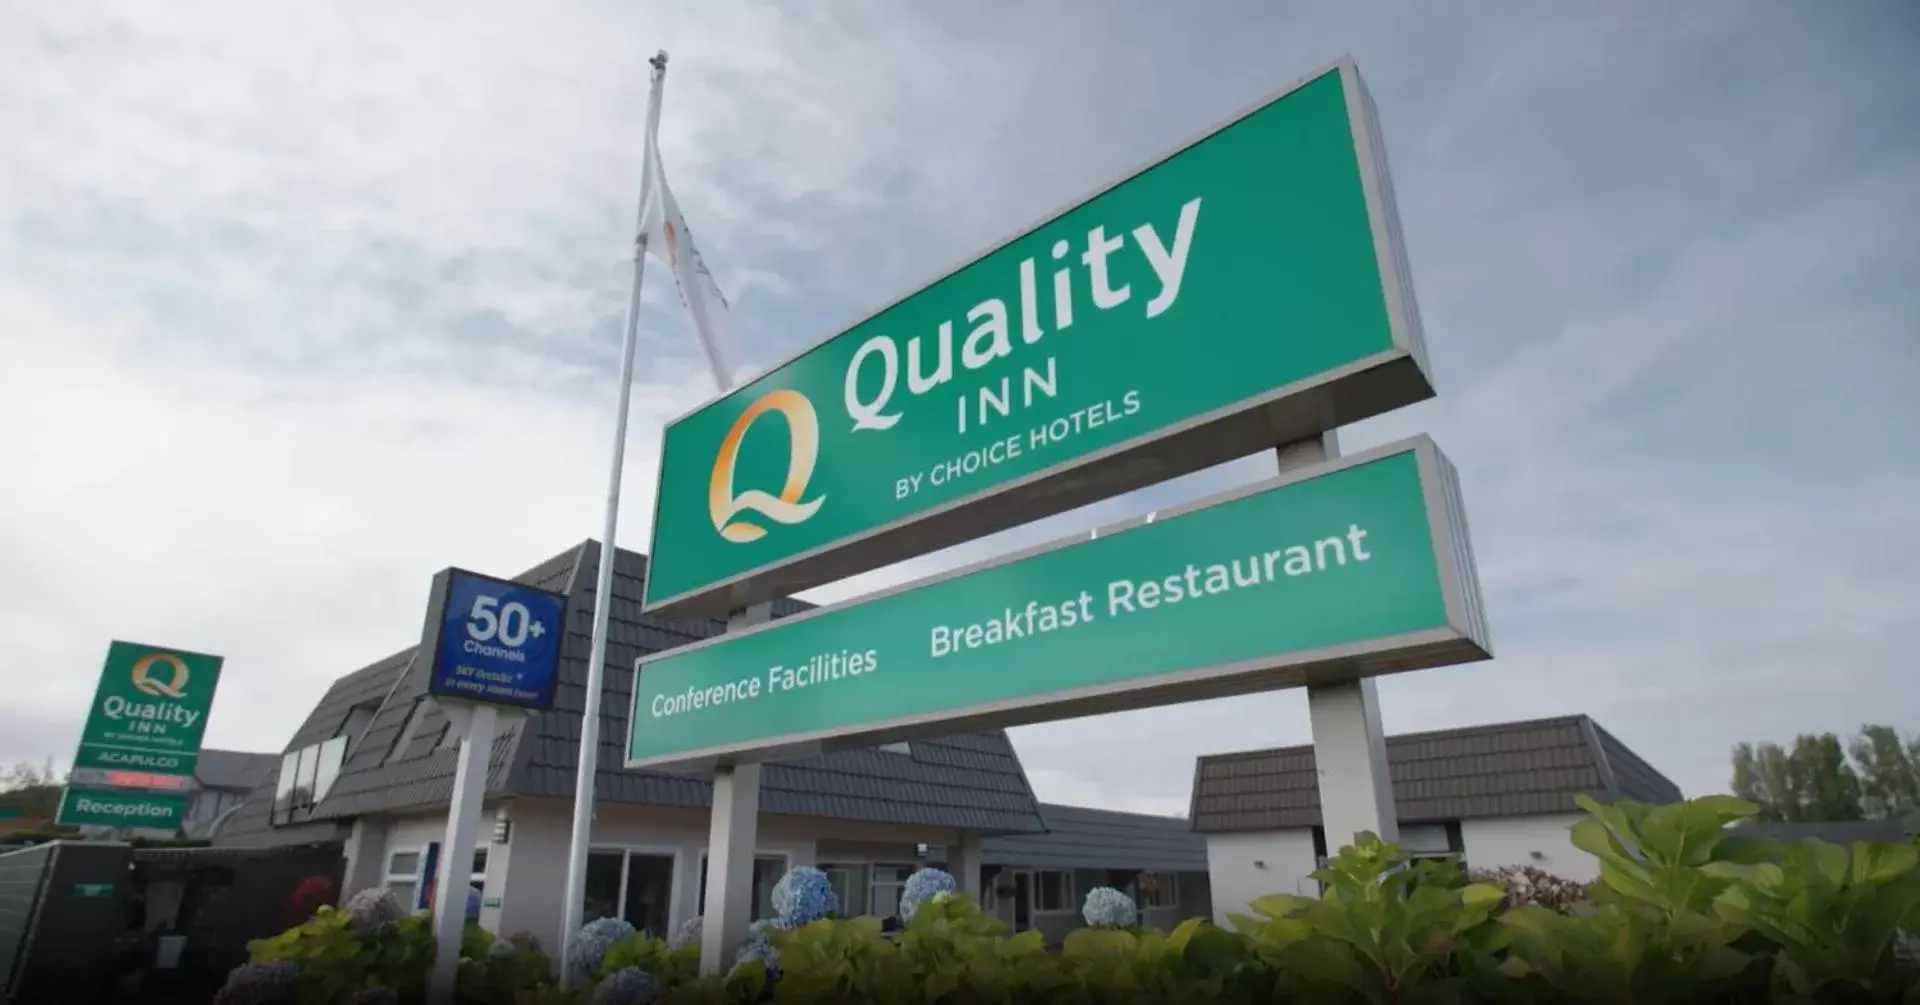 Property logo or sign in Quality Inn Acapulco Taupo